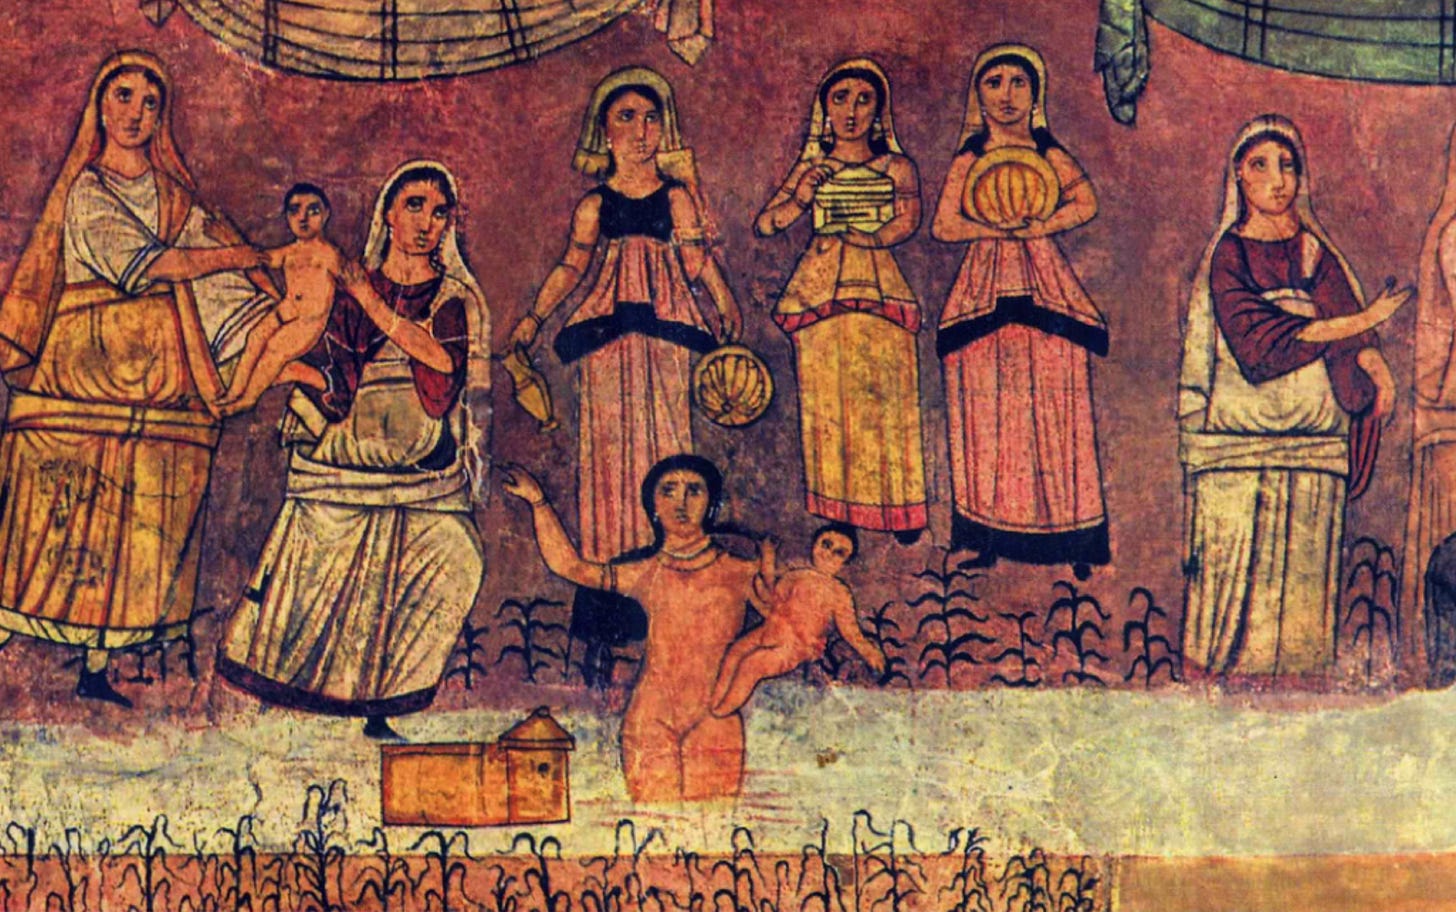 Fresco of women, with a naked Pharaoh's daughter holding a naked baby Moses in the river in the center